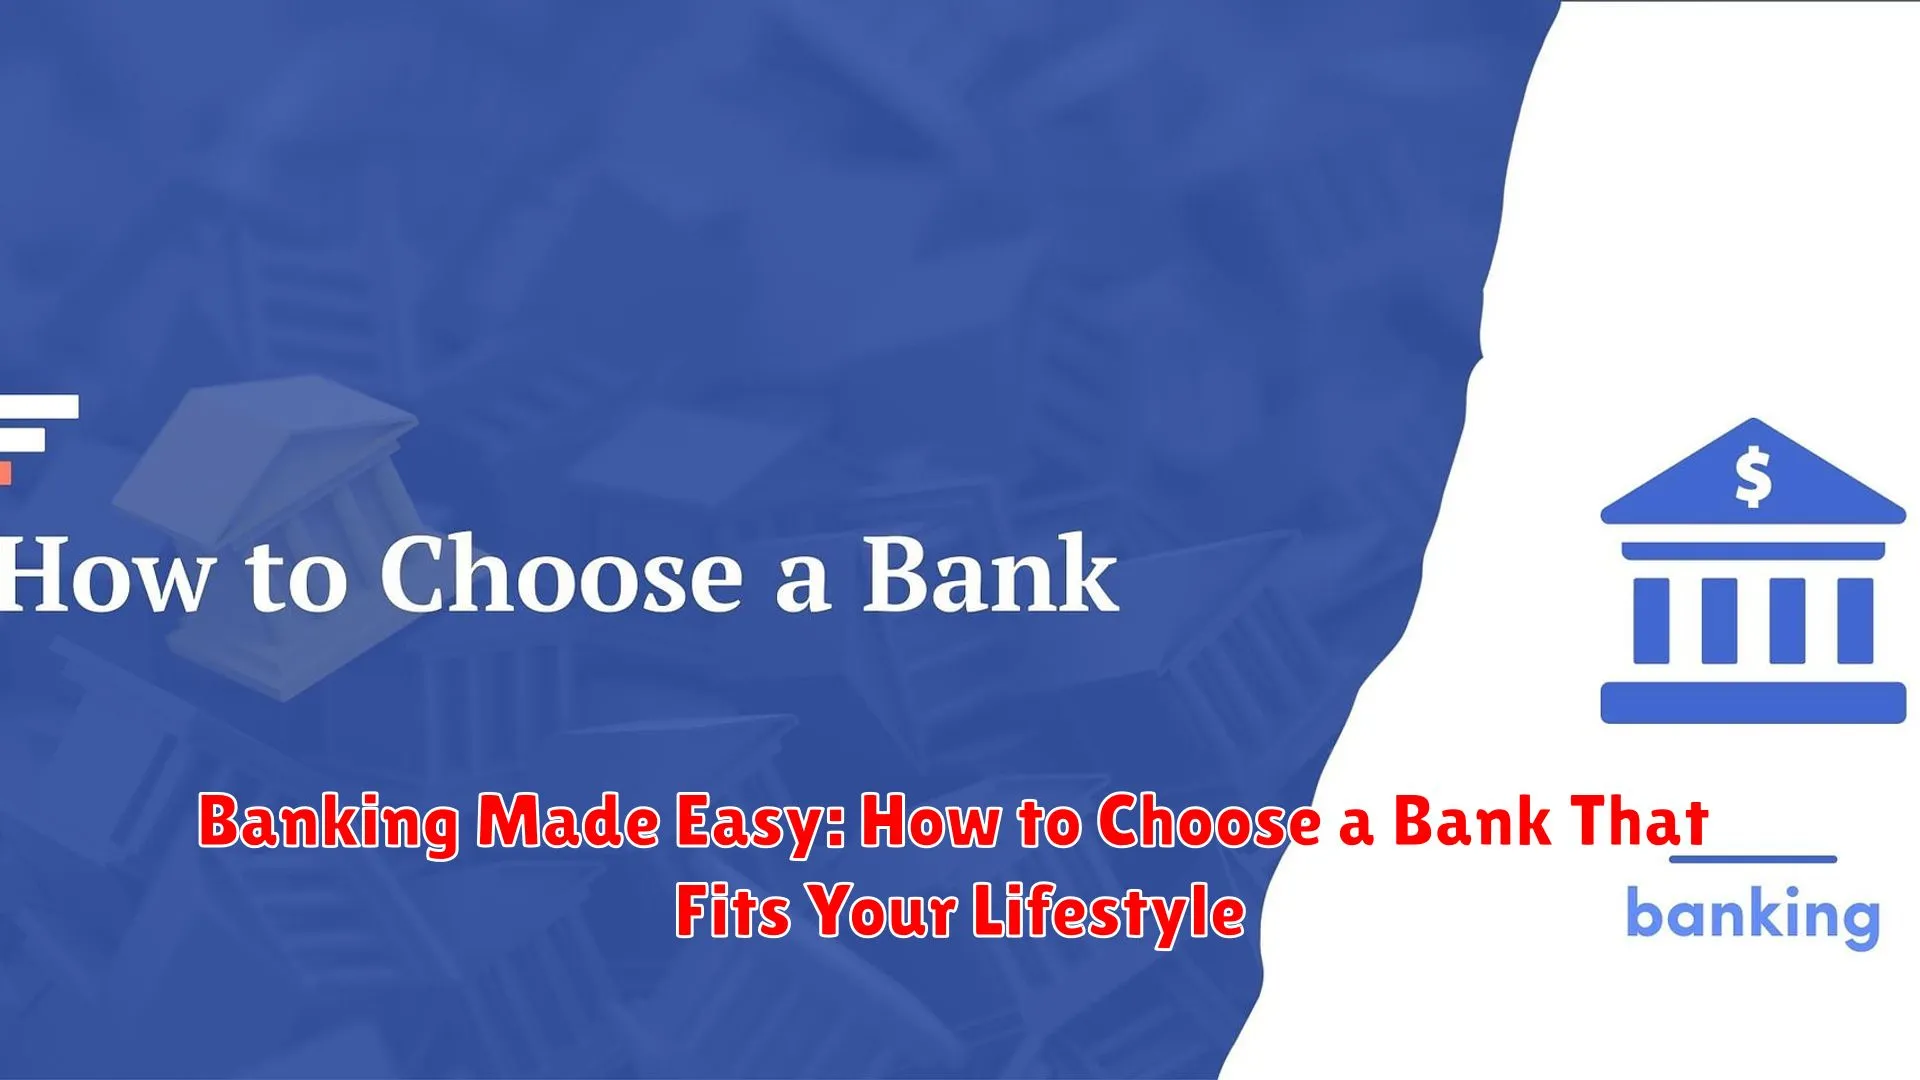 Banking Made Easy: How to Choose a Bank That Fits Your Lifestyle